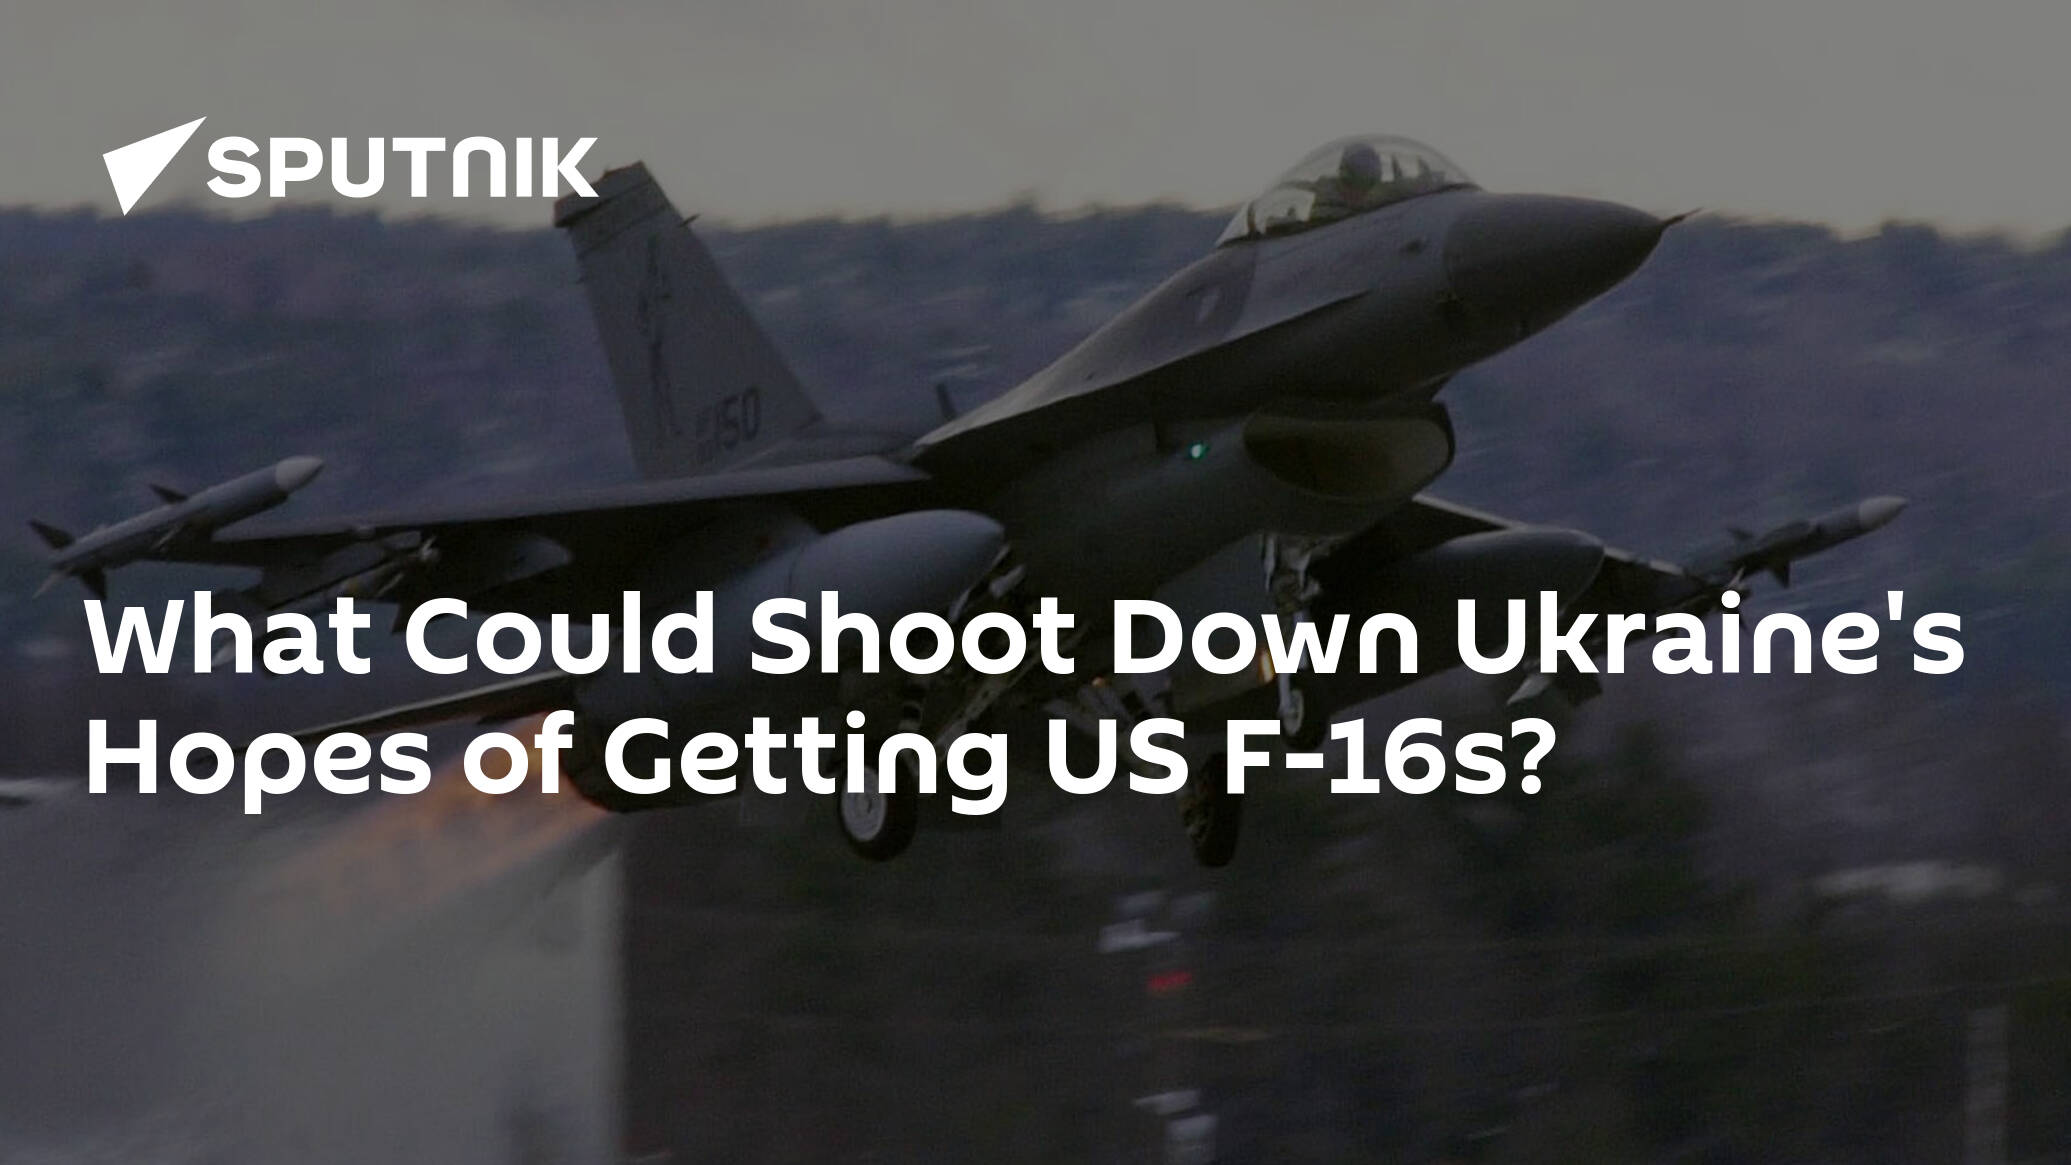 What Could Shoot Down Ukraine's Hopes of Getting US F-16s?